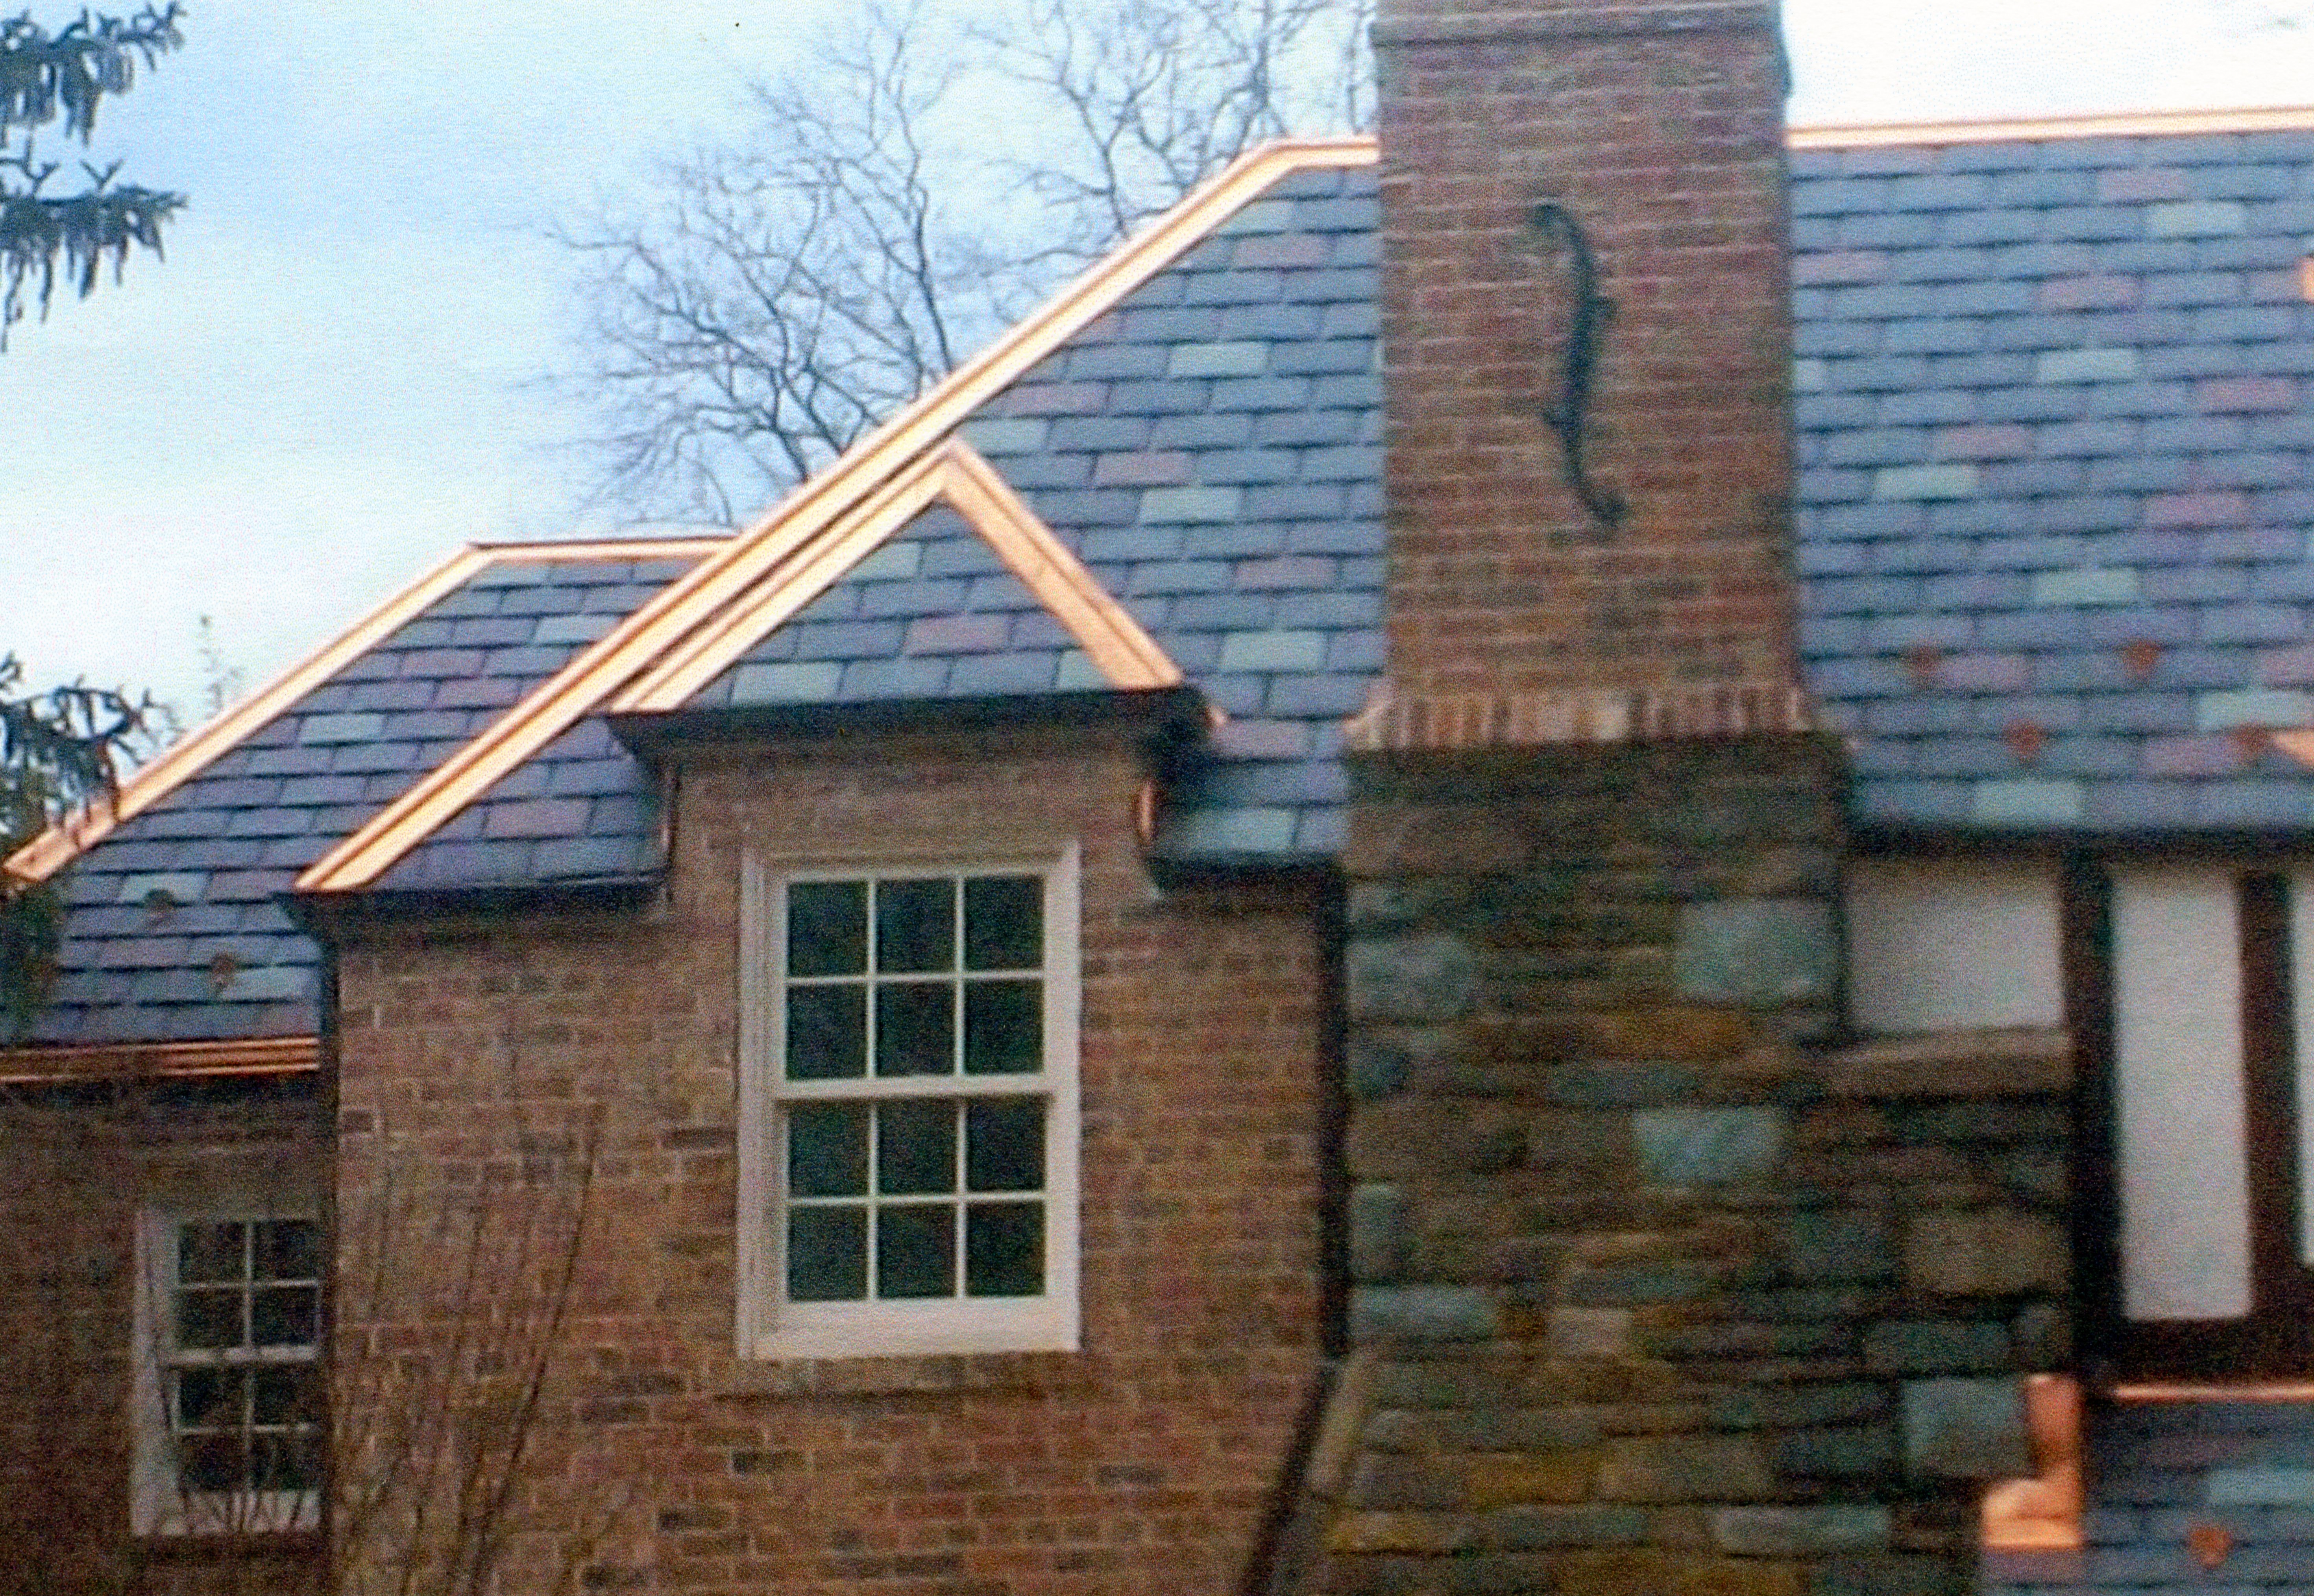 Corley Roofing & Sheet Metal Co., Inc. New Vermont Slate roof with copper accents that we